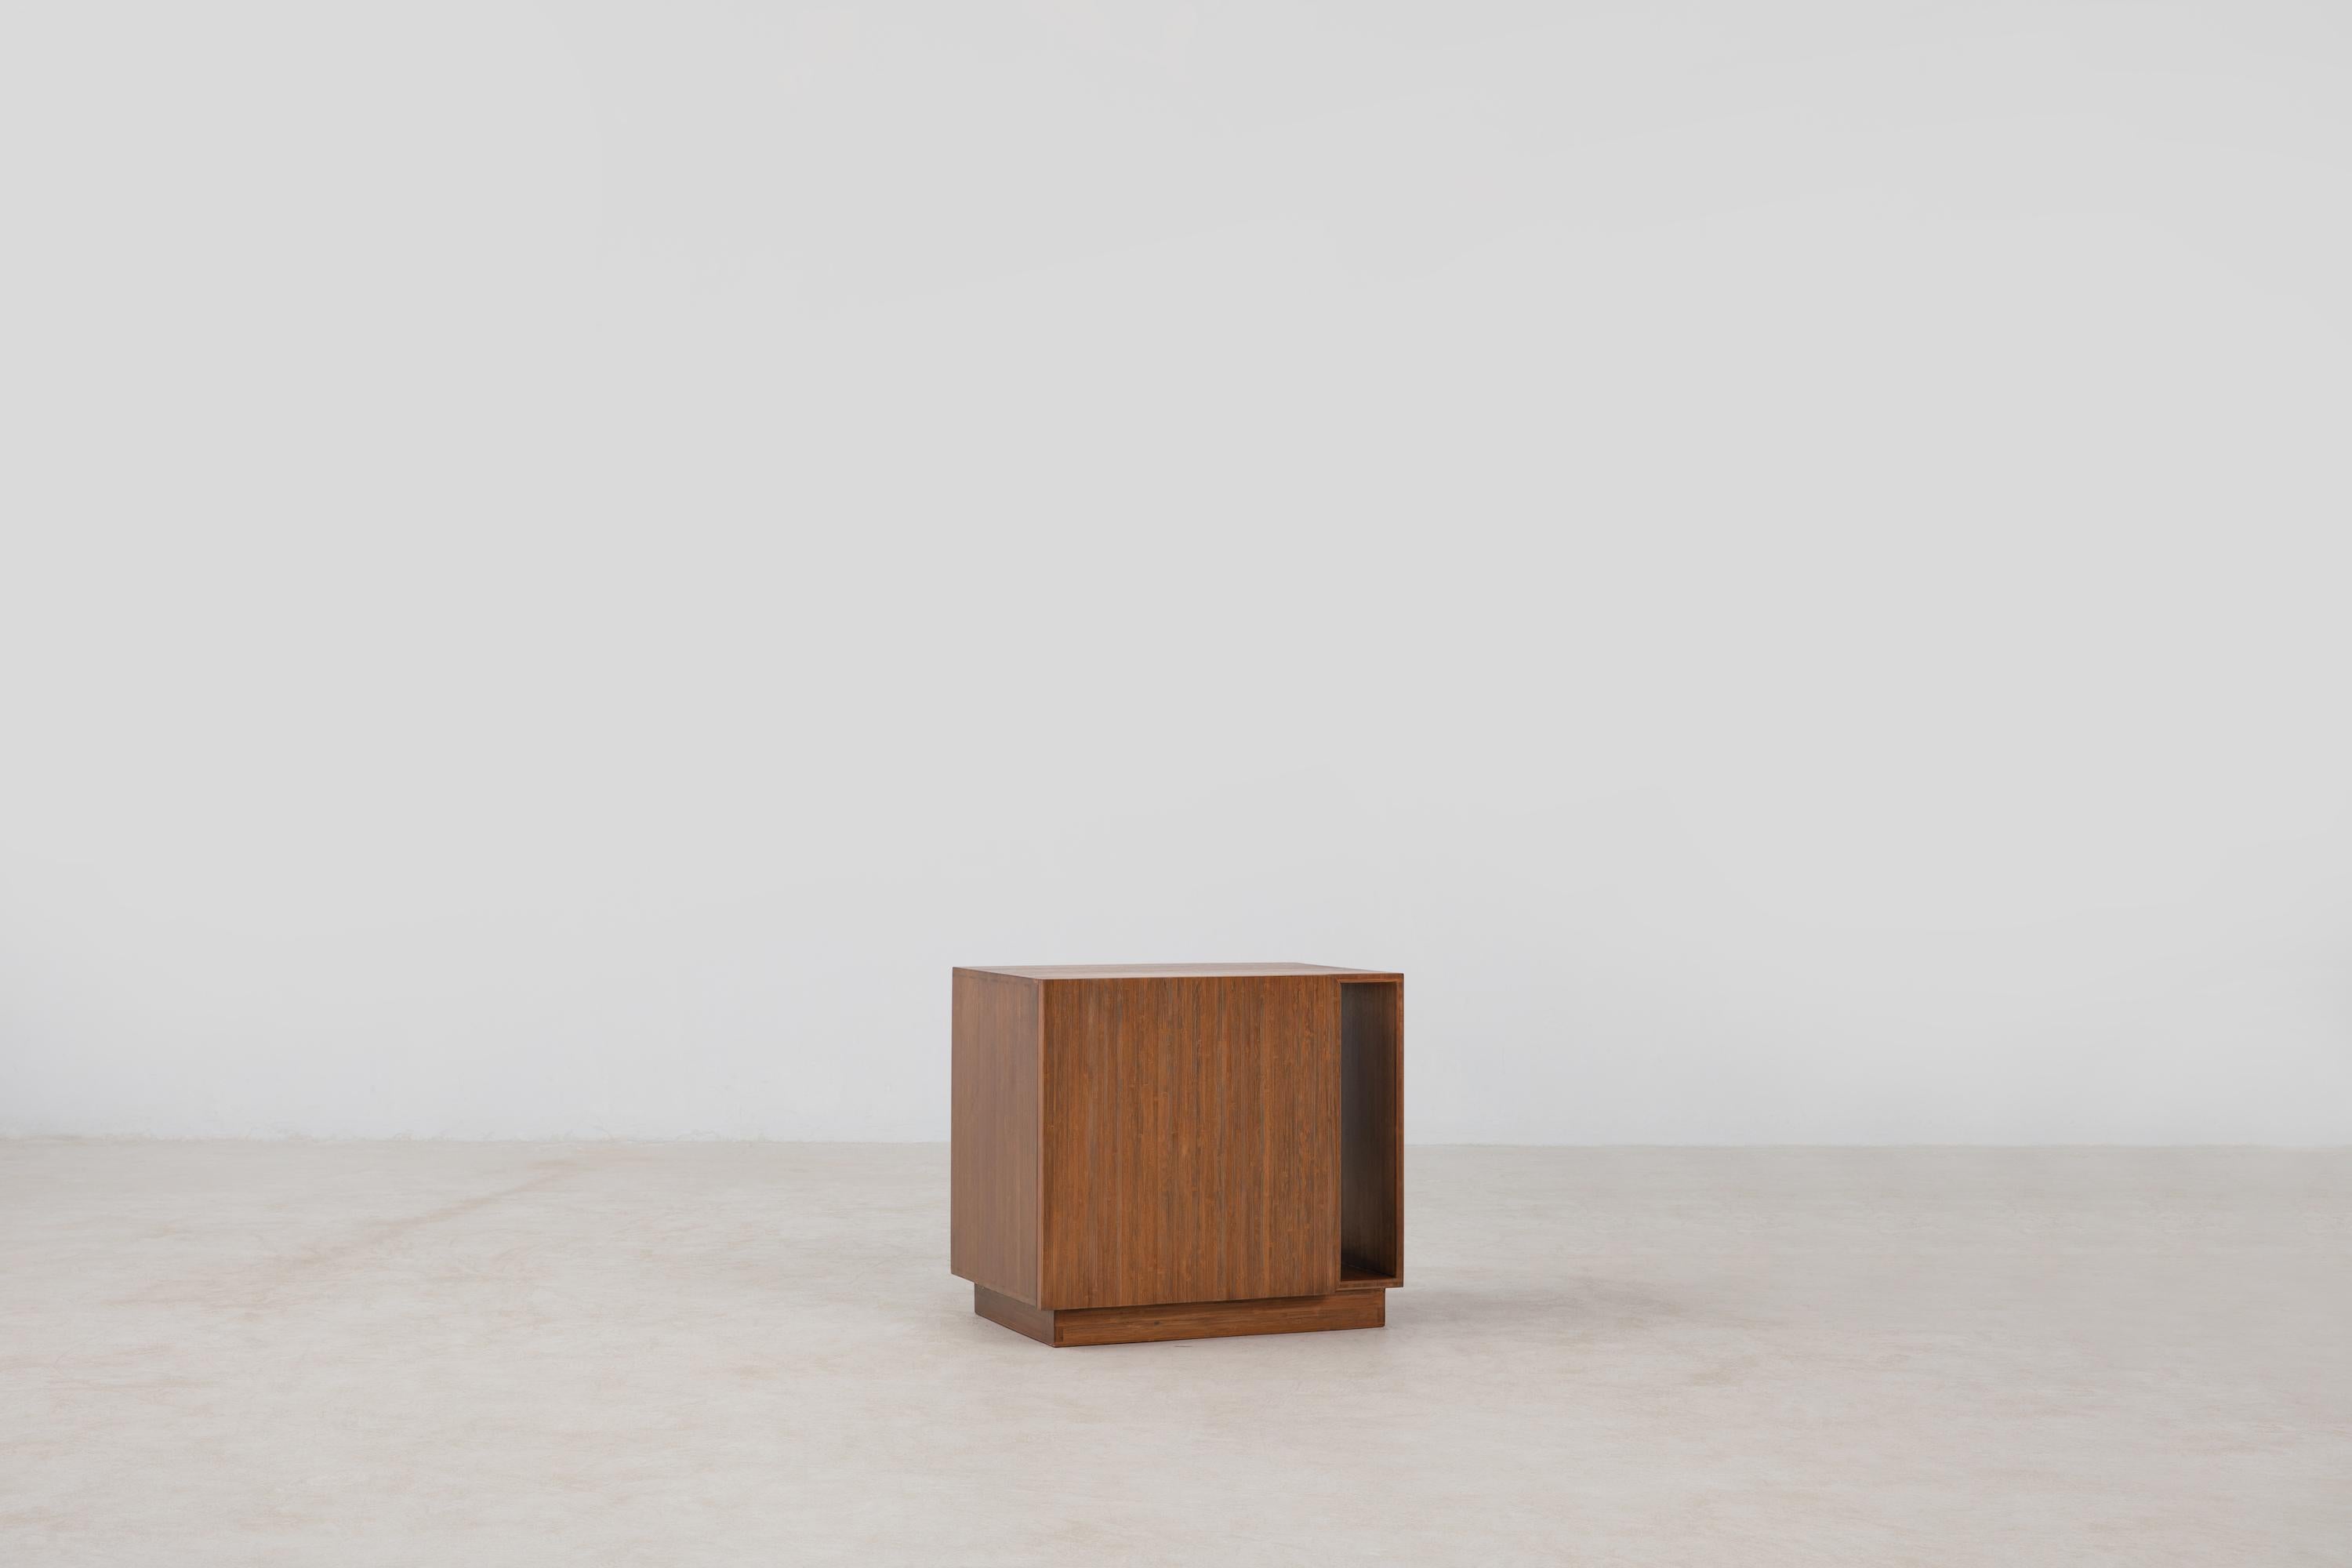 The Noura Nightstand is our nightstand designed for the Noura Bed. Like the bed, we’ve made the nightstand using solid pressed moso bamboo, in line with our commitment to pushing more sustainable materials. The moso bamboo is pressed into a dense